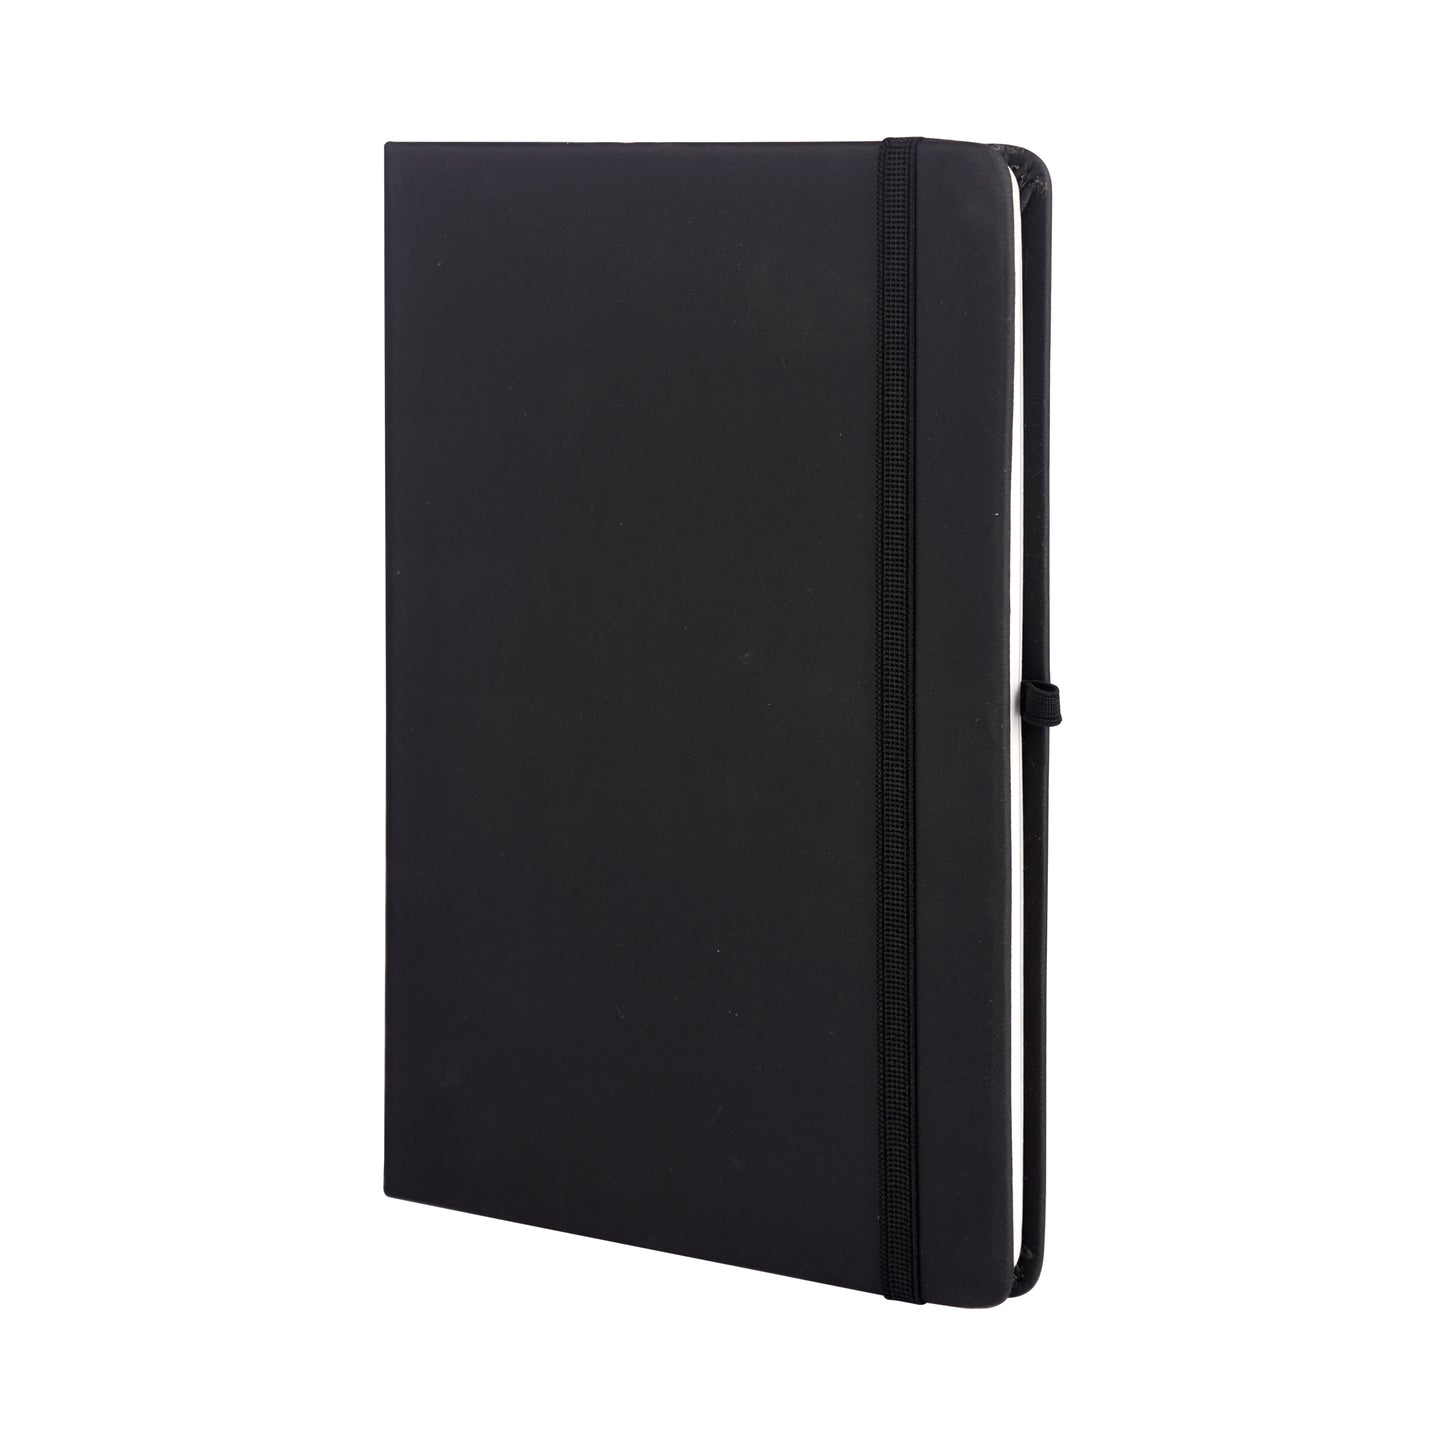 Classic Black 3in1 Combo Gift Set Notebook Diary, Pen, and Bottle - For Employee Joining Kit, Corporate, Client or Dealer Gifting HK37338